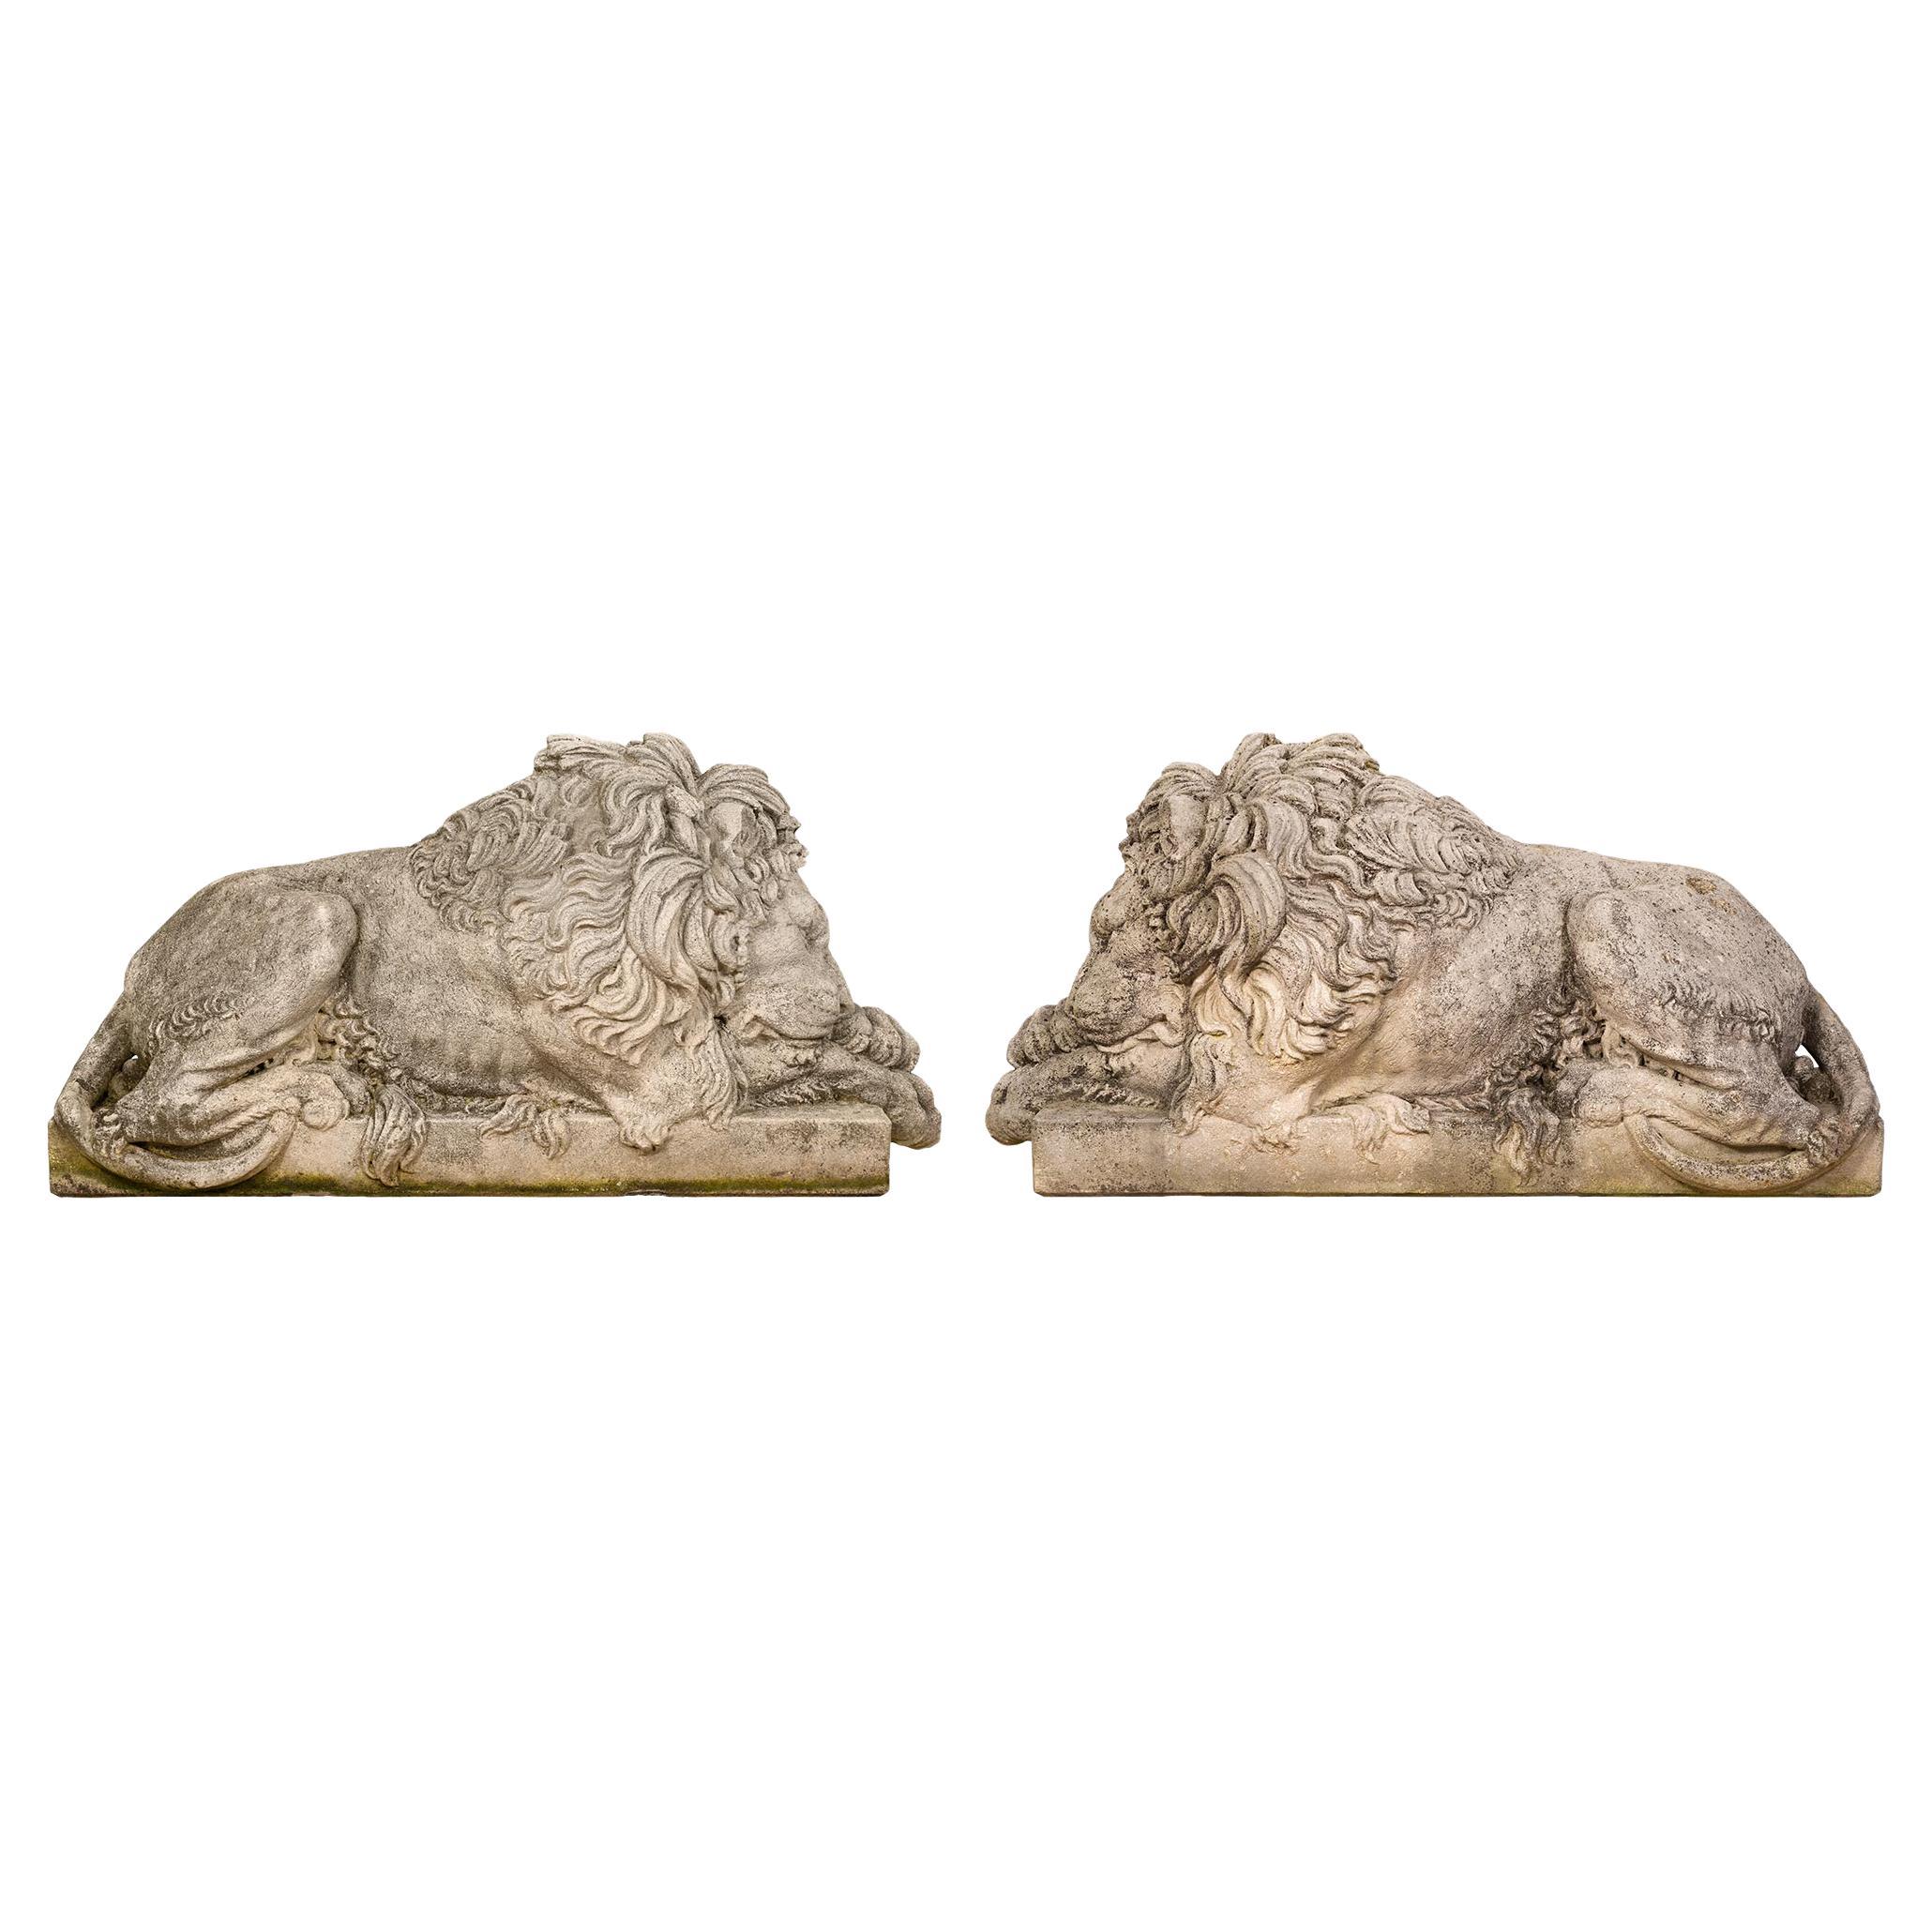 Pair of Late 19th Century Composite Stone Statues of Lions